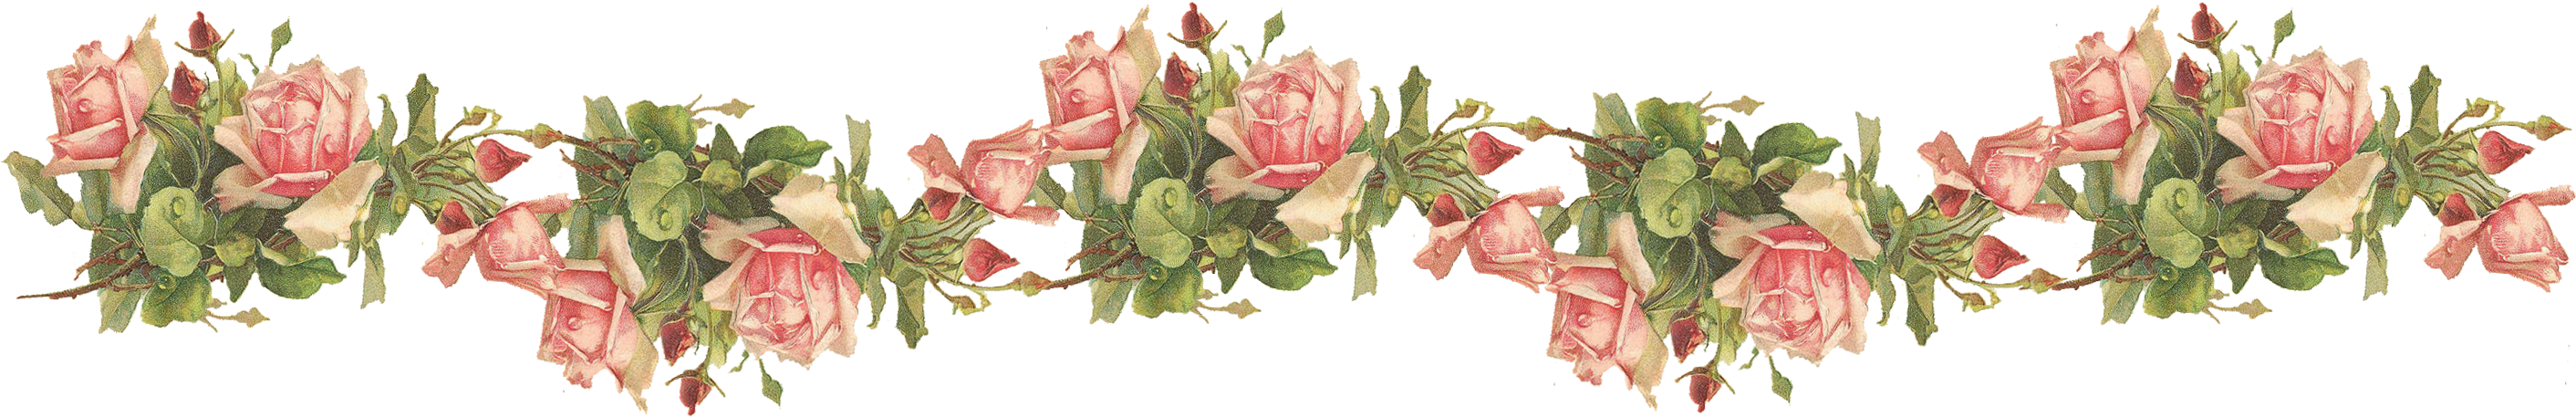 Catherine Klein Pink Roses Digital Elements Wings Of - Transparent Background Roses Border (2823x475)